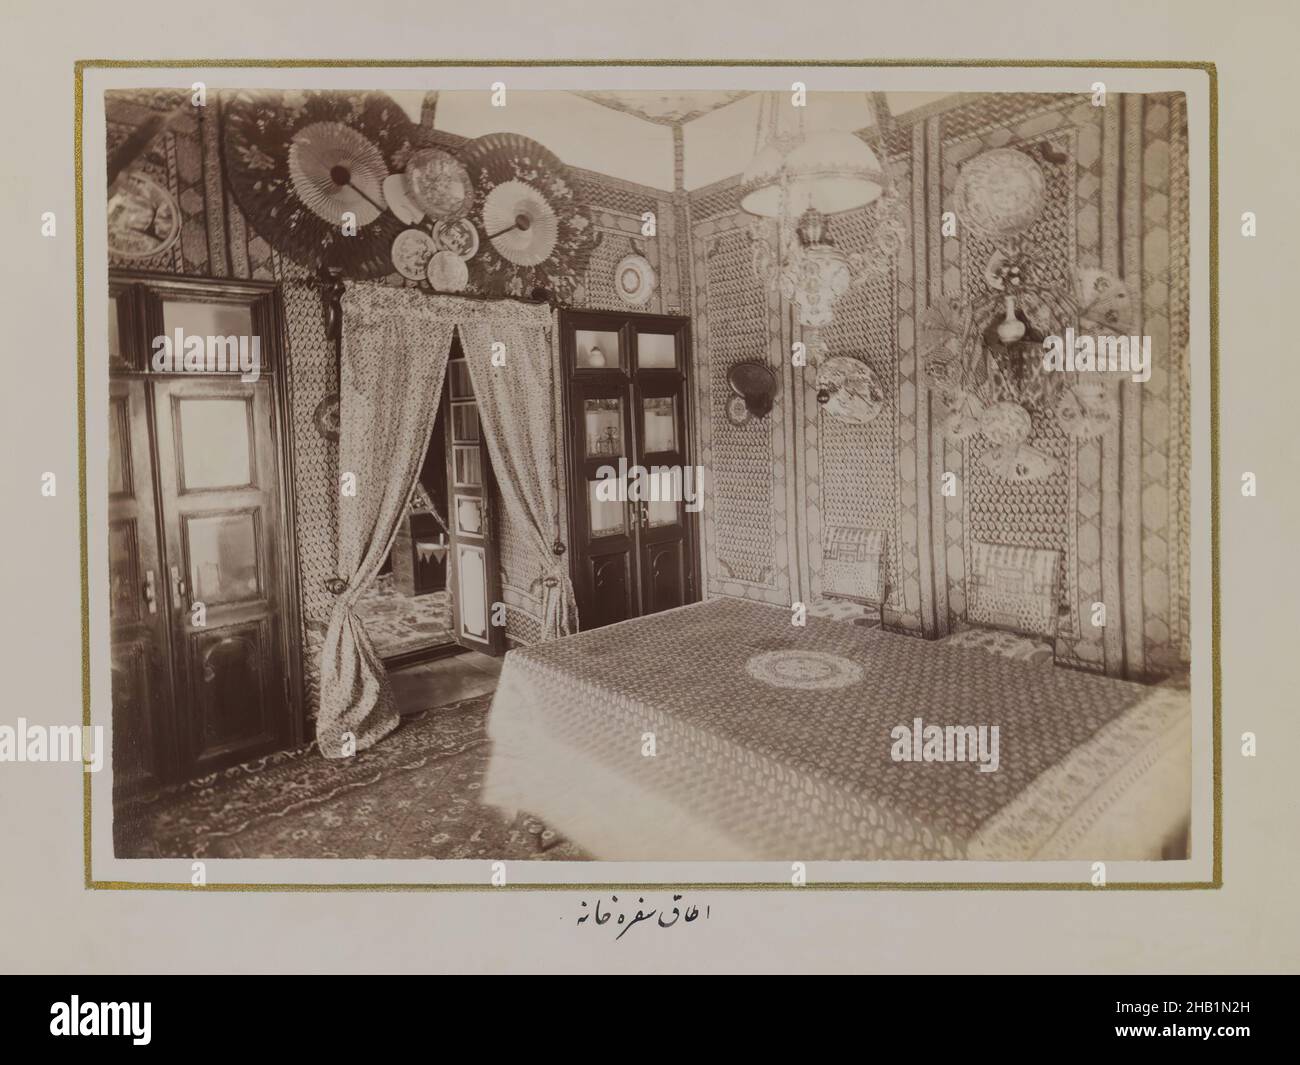 One of 274 Vintage Photographs, Photograph, late 19th-early 20th century, Qajar, Qajar Period, image: 6 1/2 x 9 1/16 in., 16.5 x 23 cm, curtains, decorative, furniture, pattern, persian rug, persian script, room Stock Photo